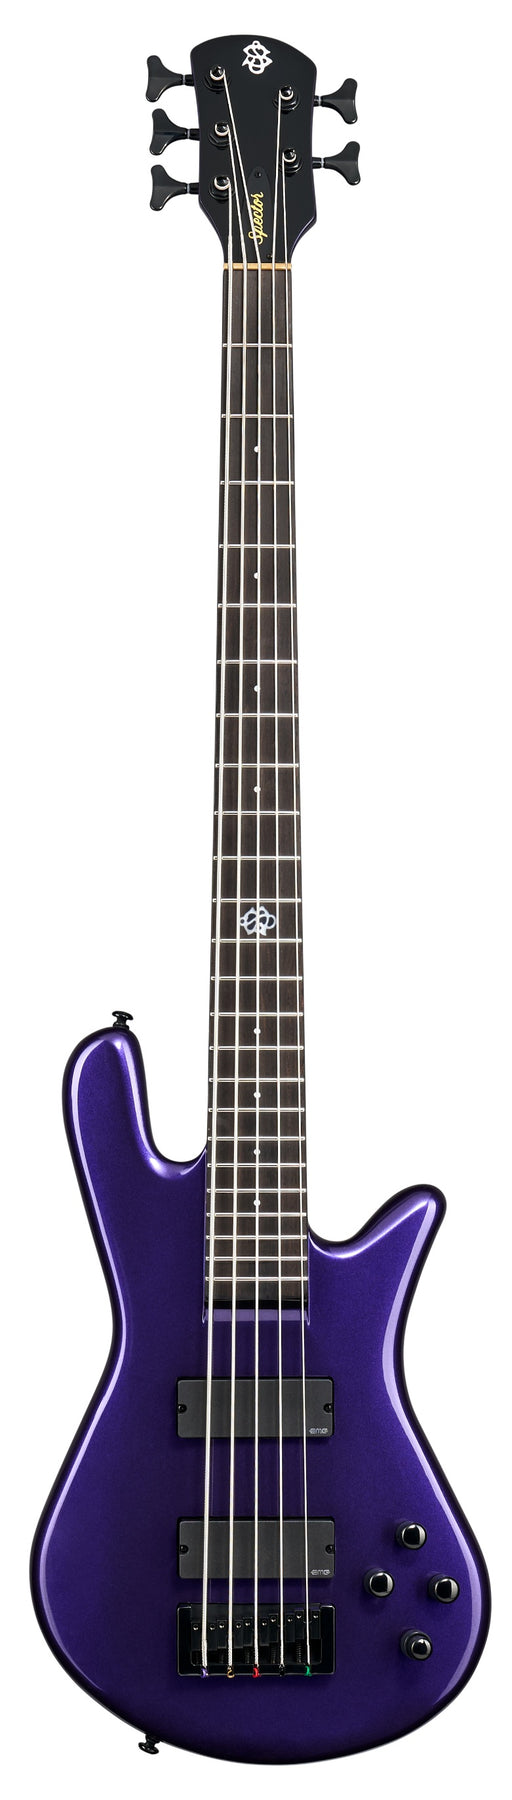 Bajo Electrico Spector Ns Ethos 5 Plume Gloss